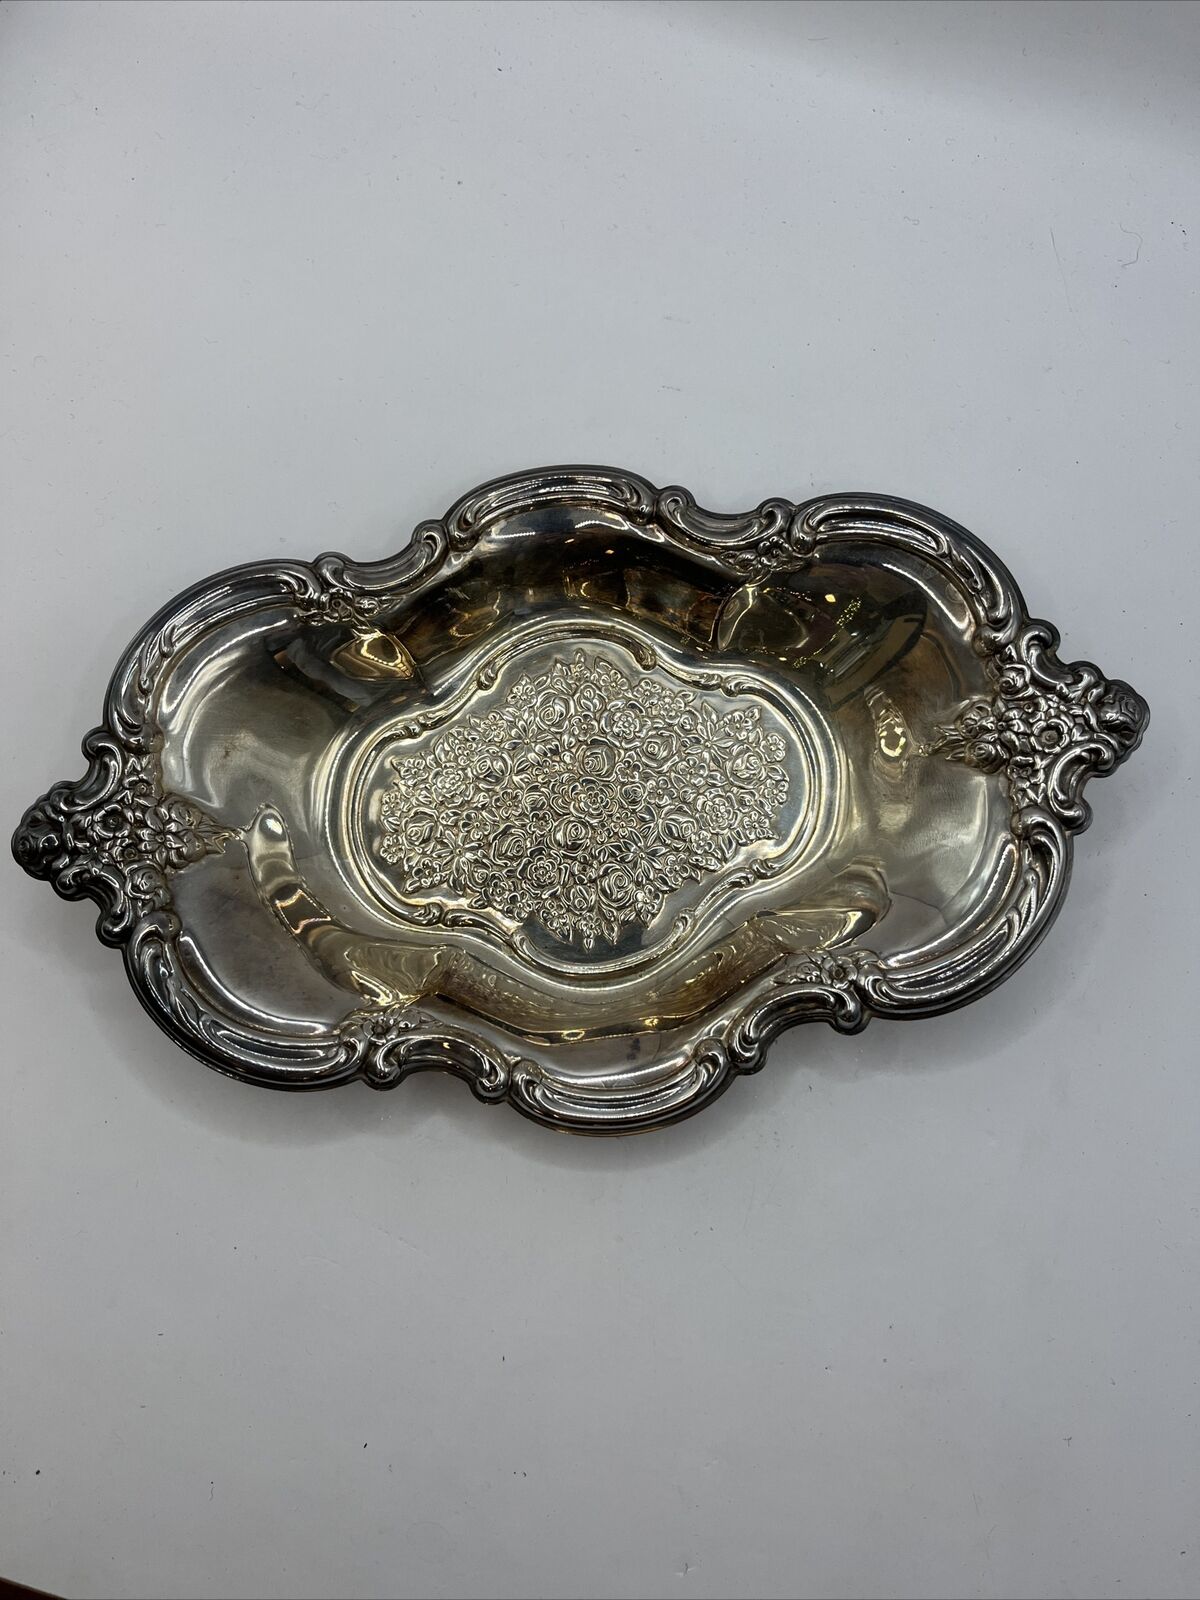 Vintage Silver-Plated Oval Dish